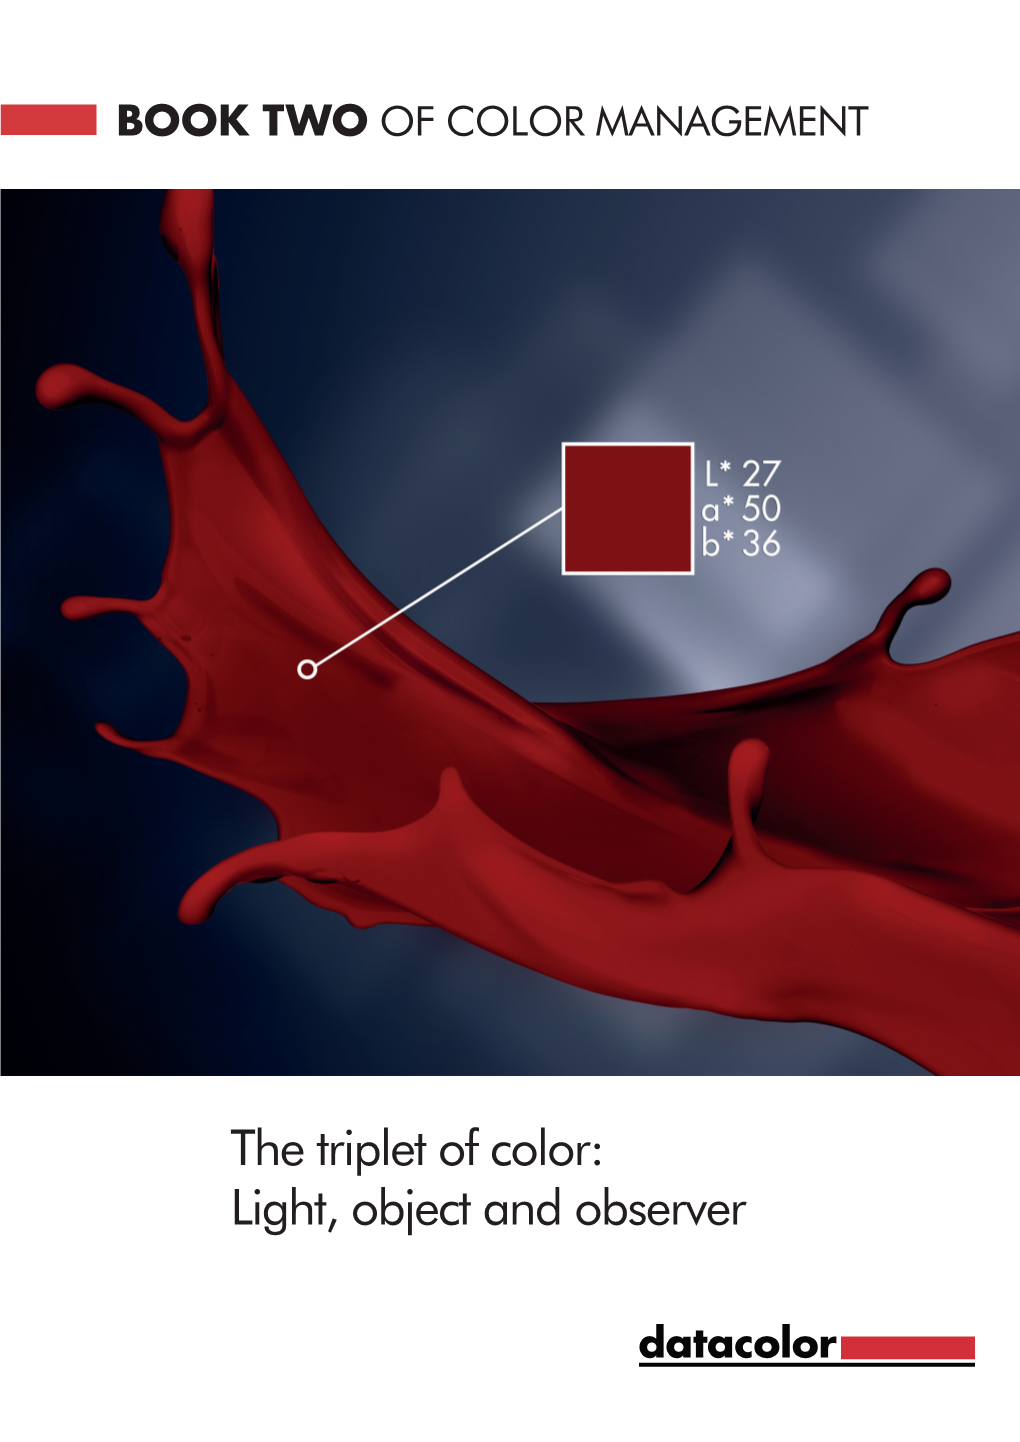 The Triplet of Color: Light, Object and Observer